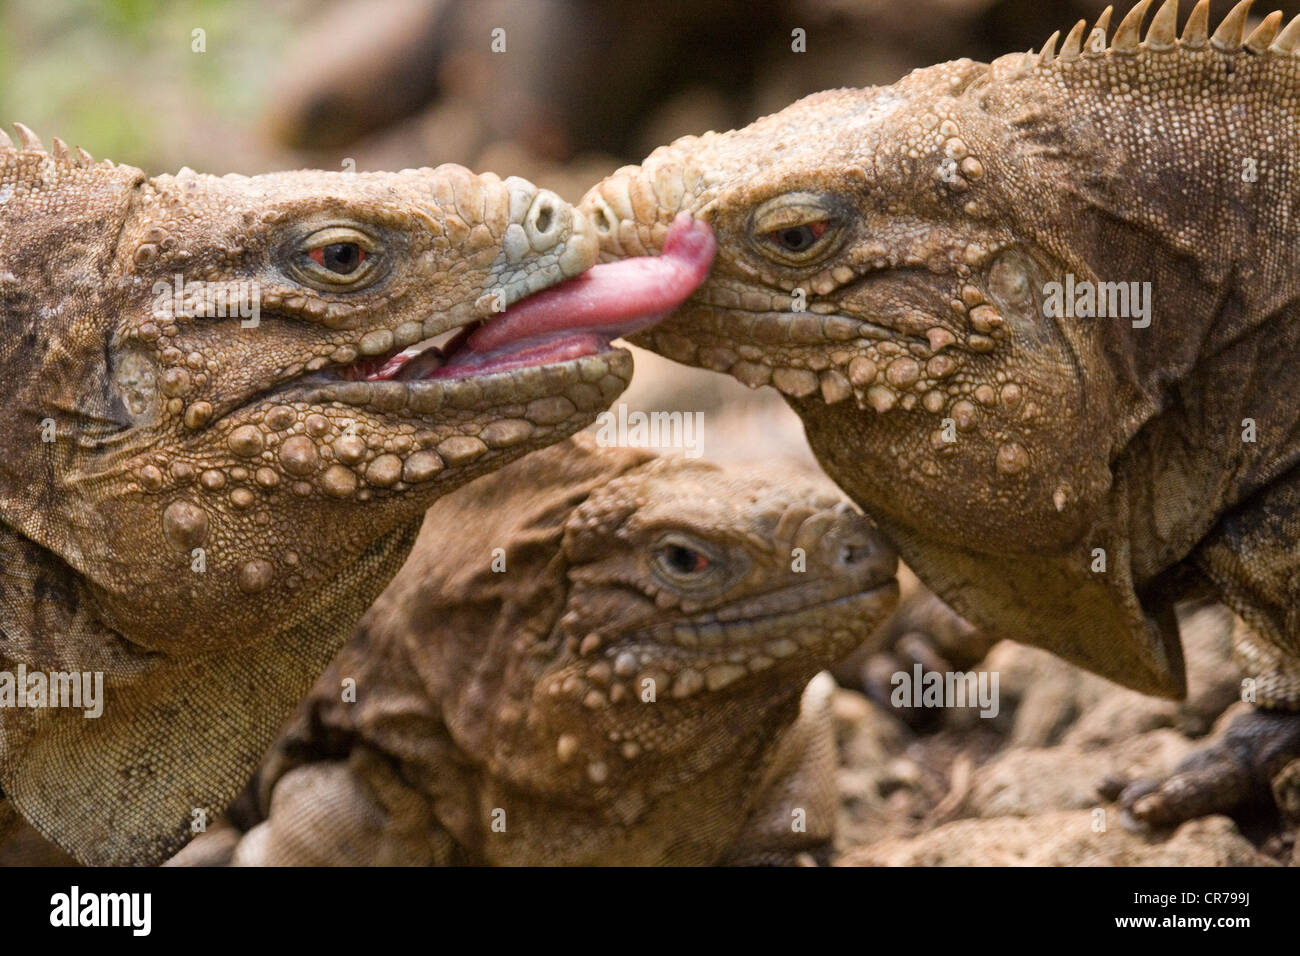 Iguana licks the face of another while a third Iguana watches Stock Photo